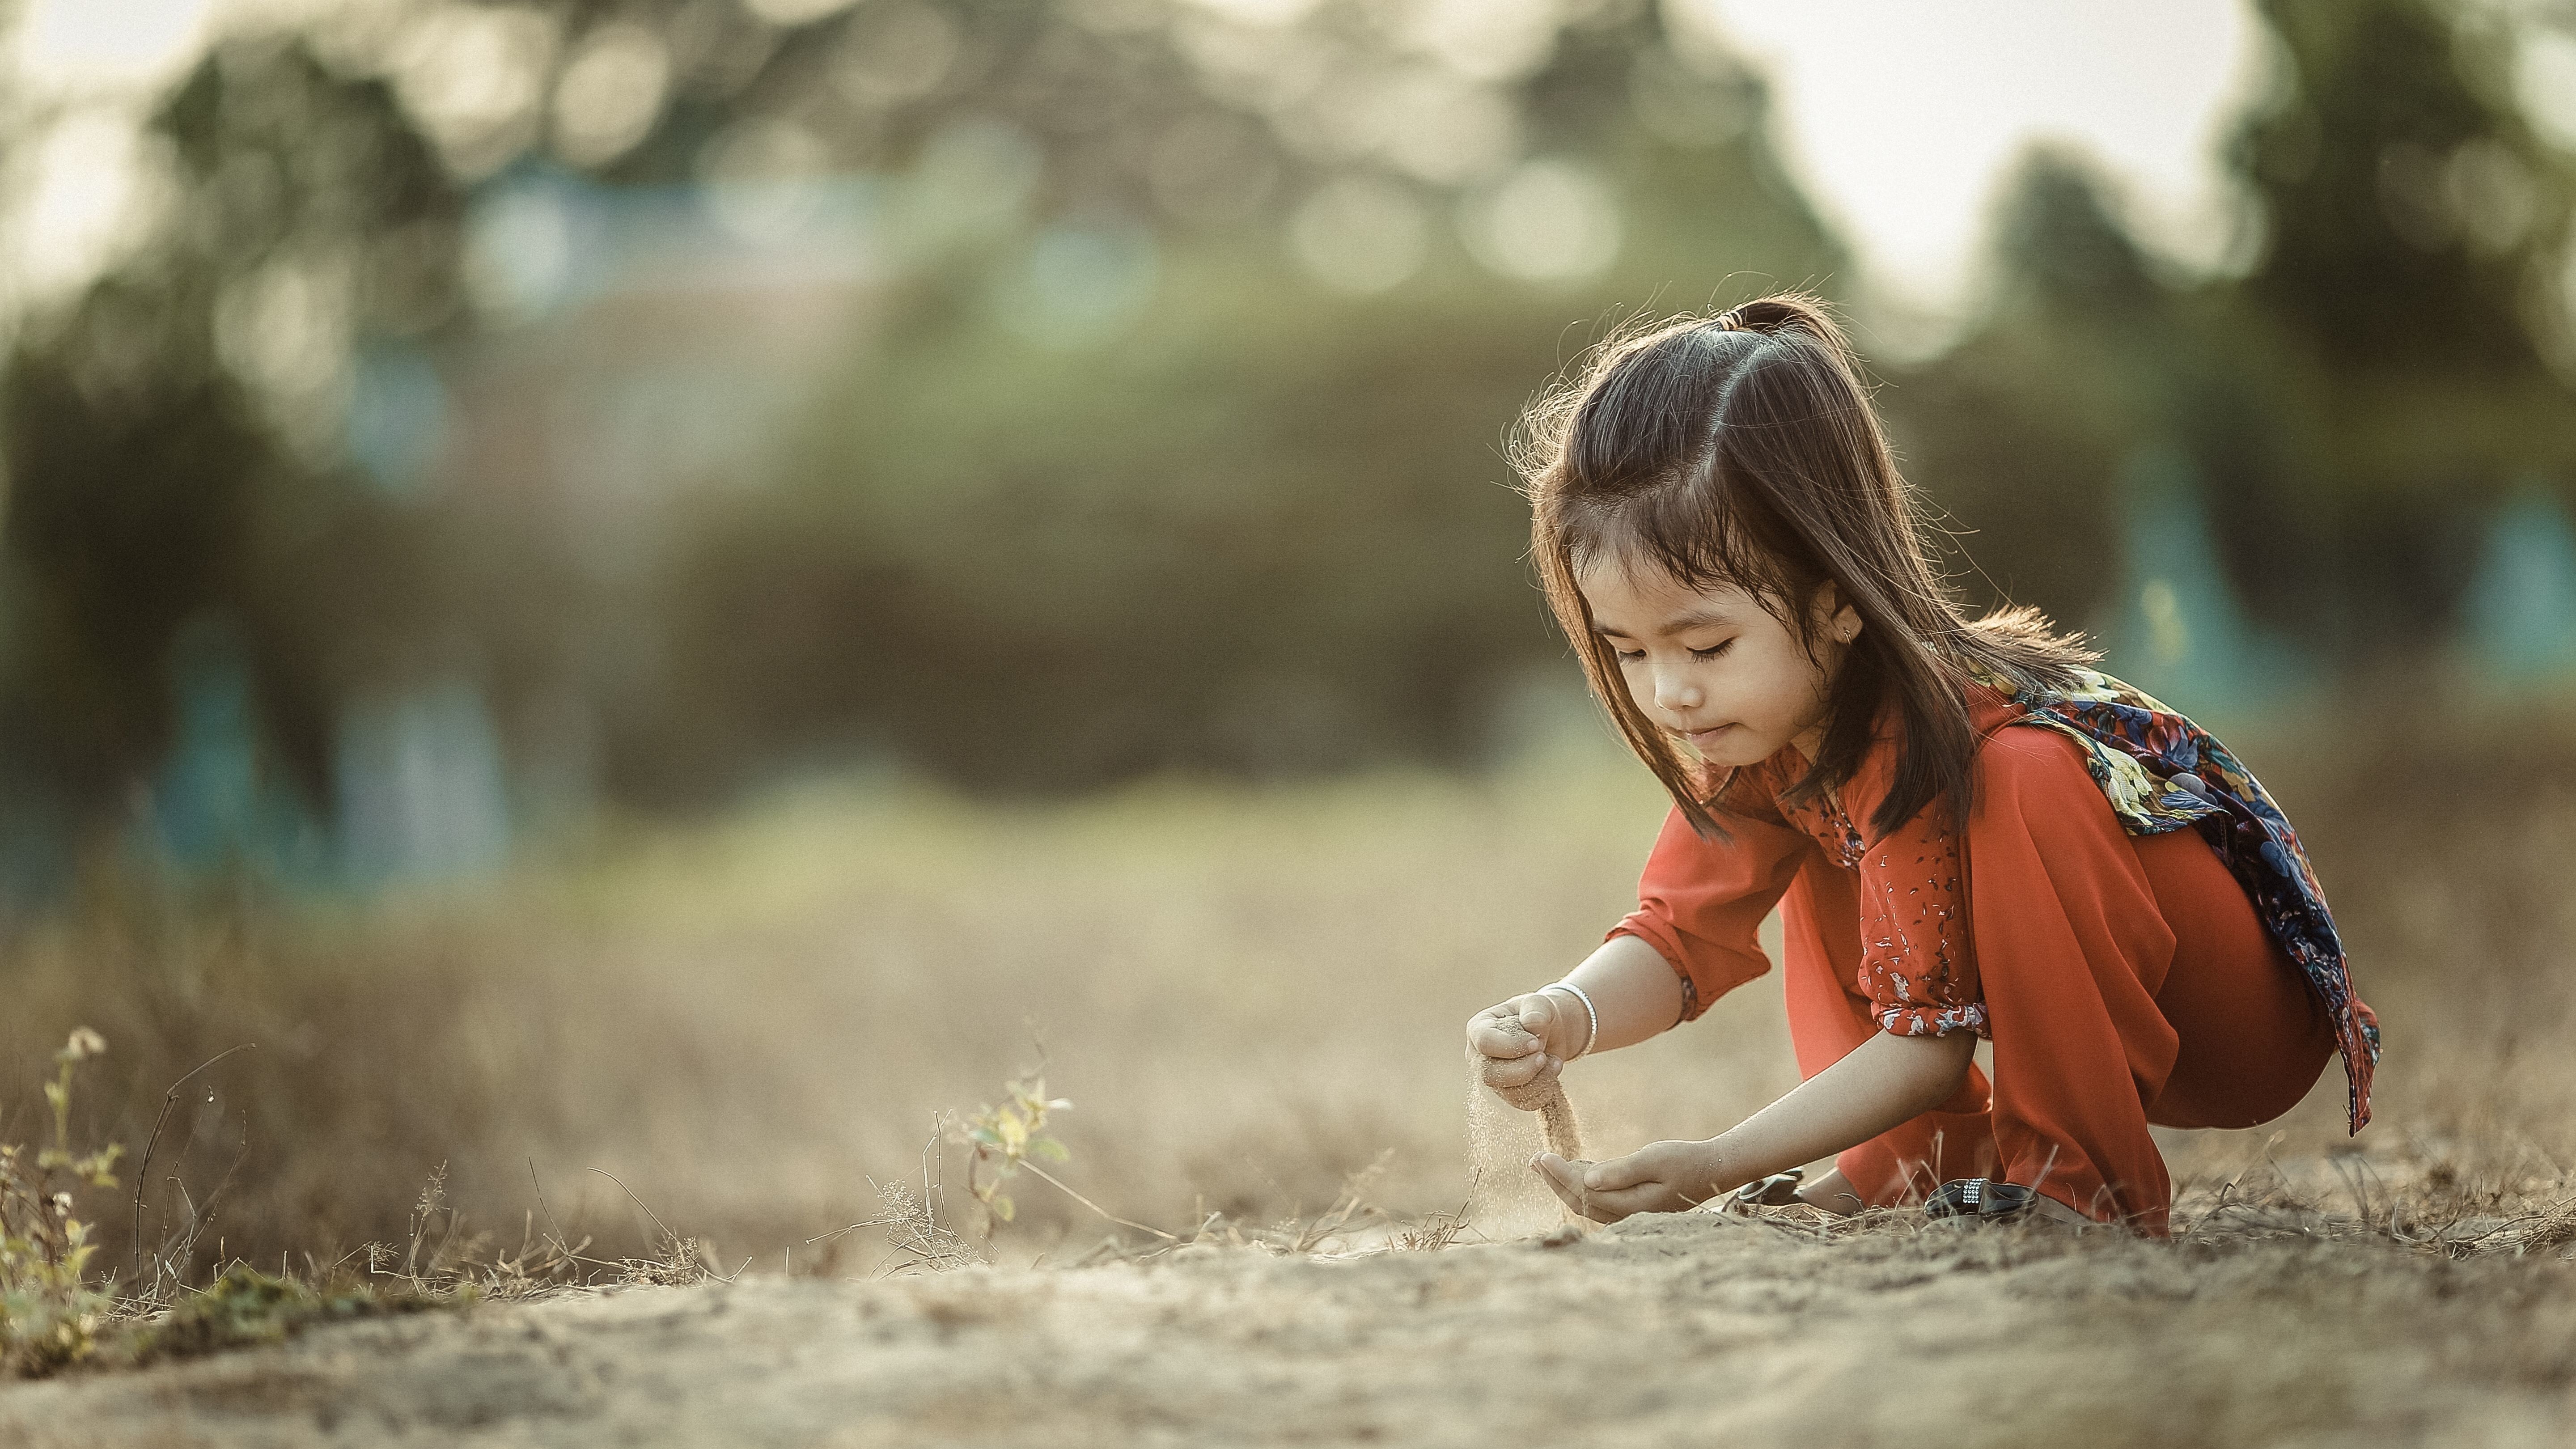 Cute Girl Child Playing with Sand Image